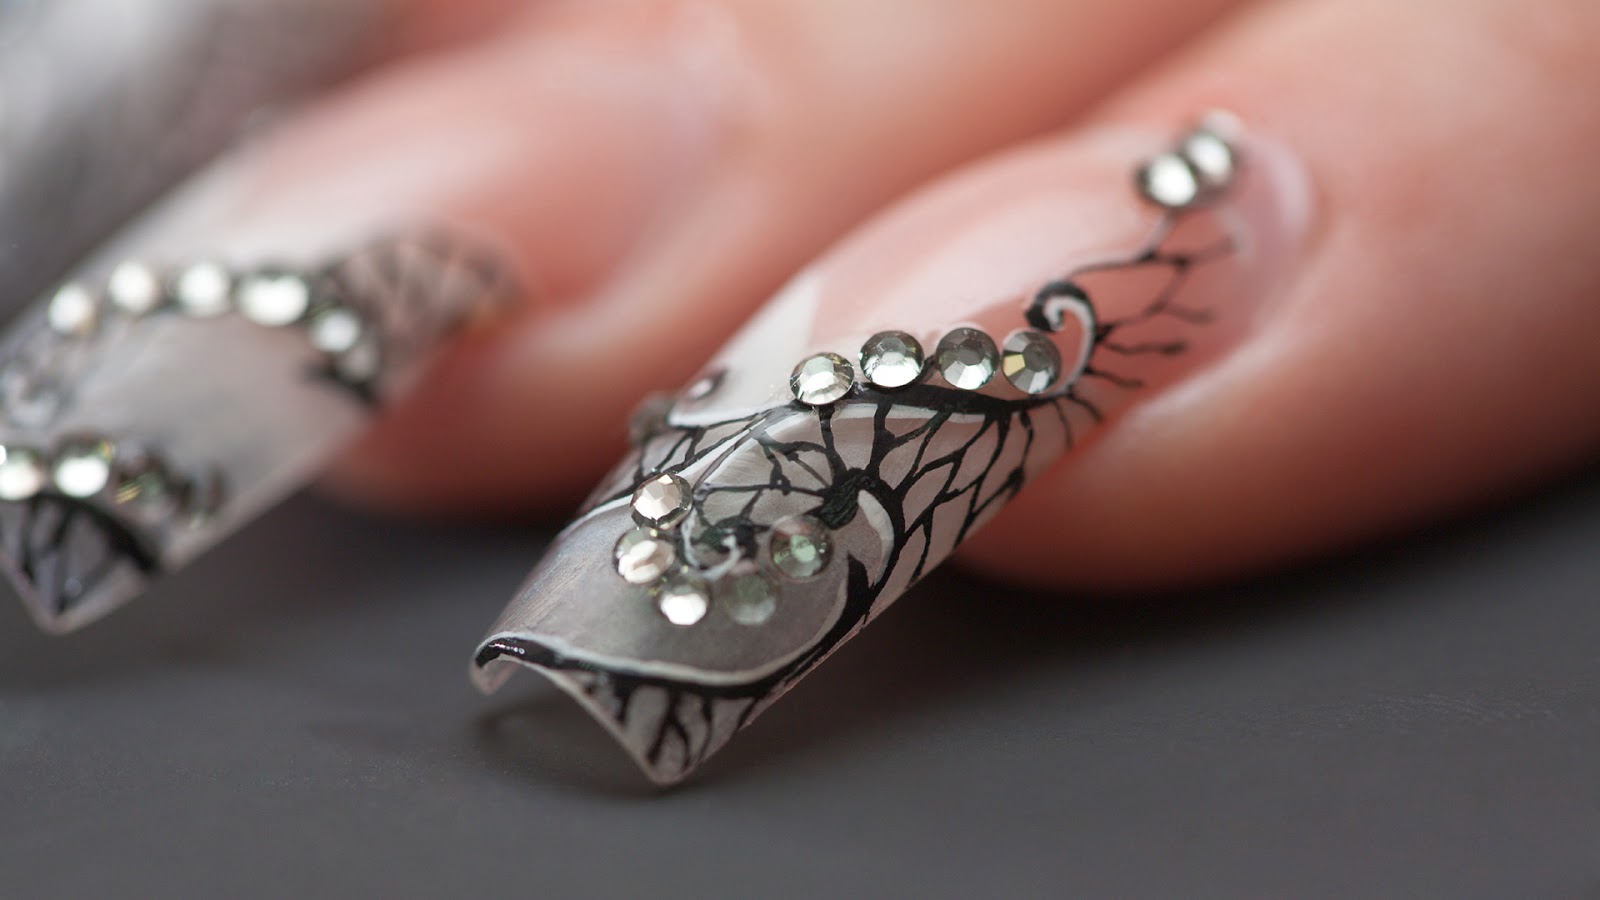 nail art designs for the perfect appearance of a woman